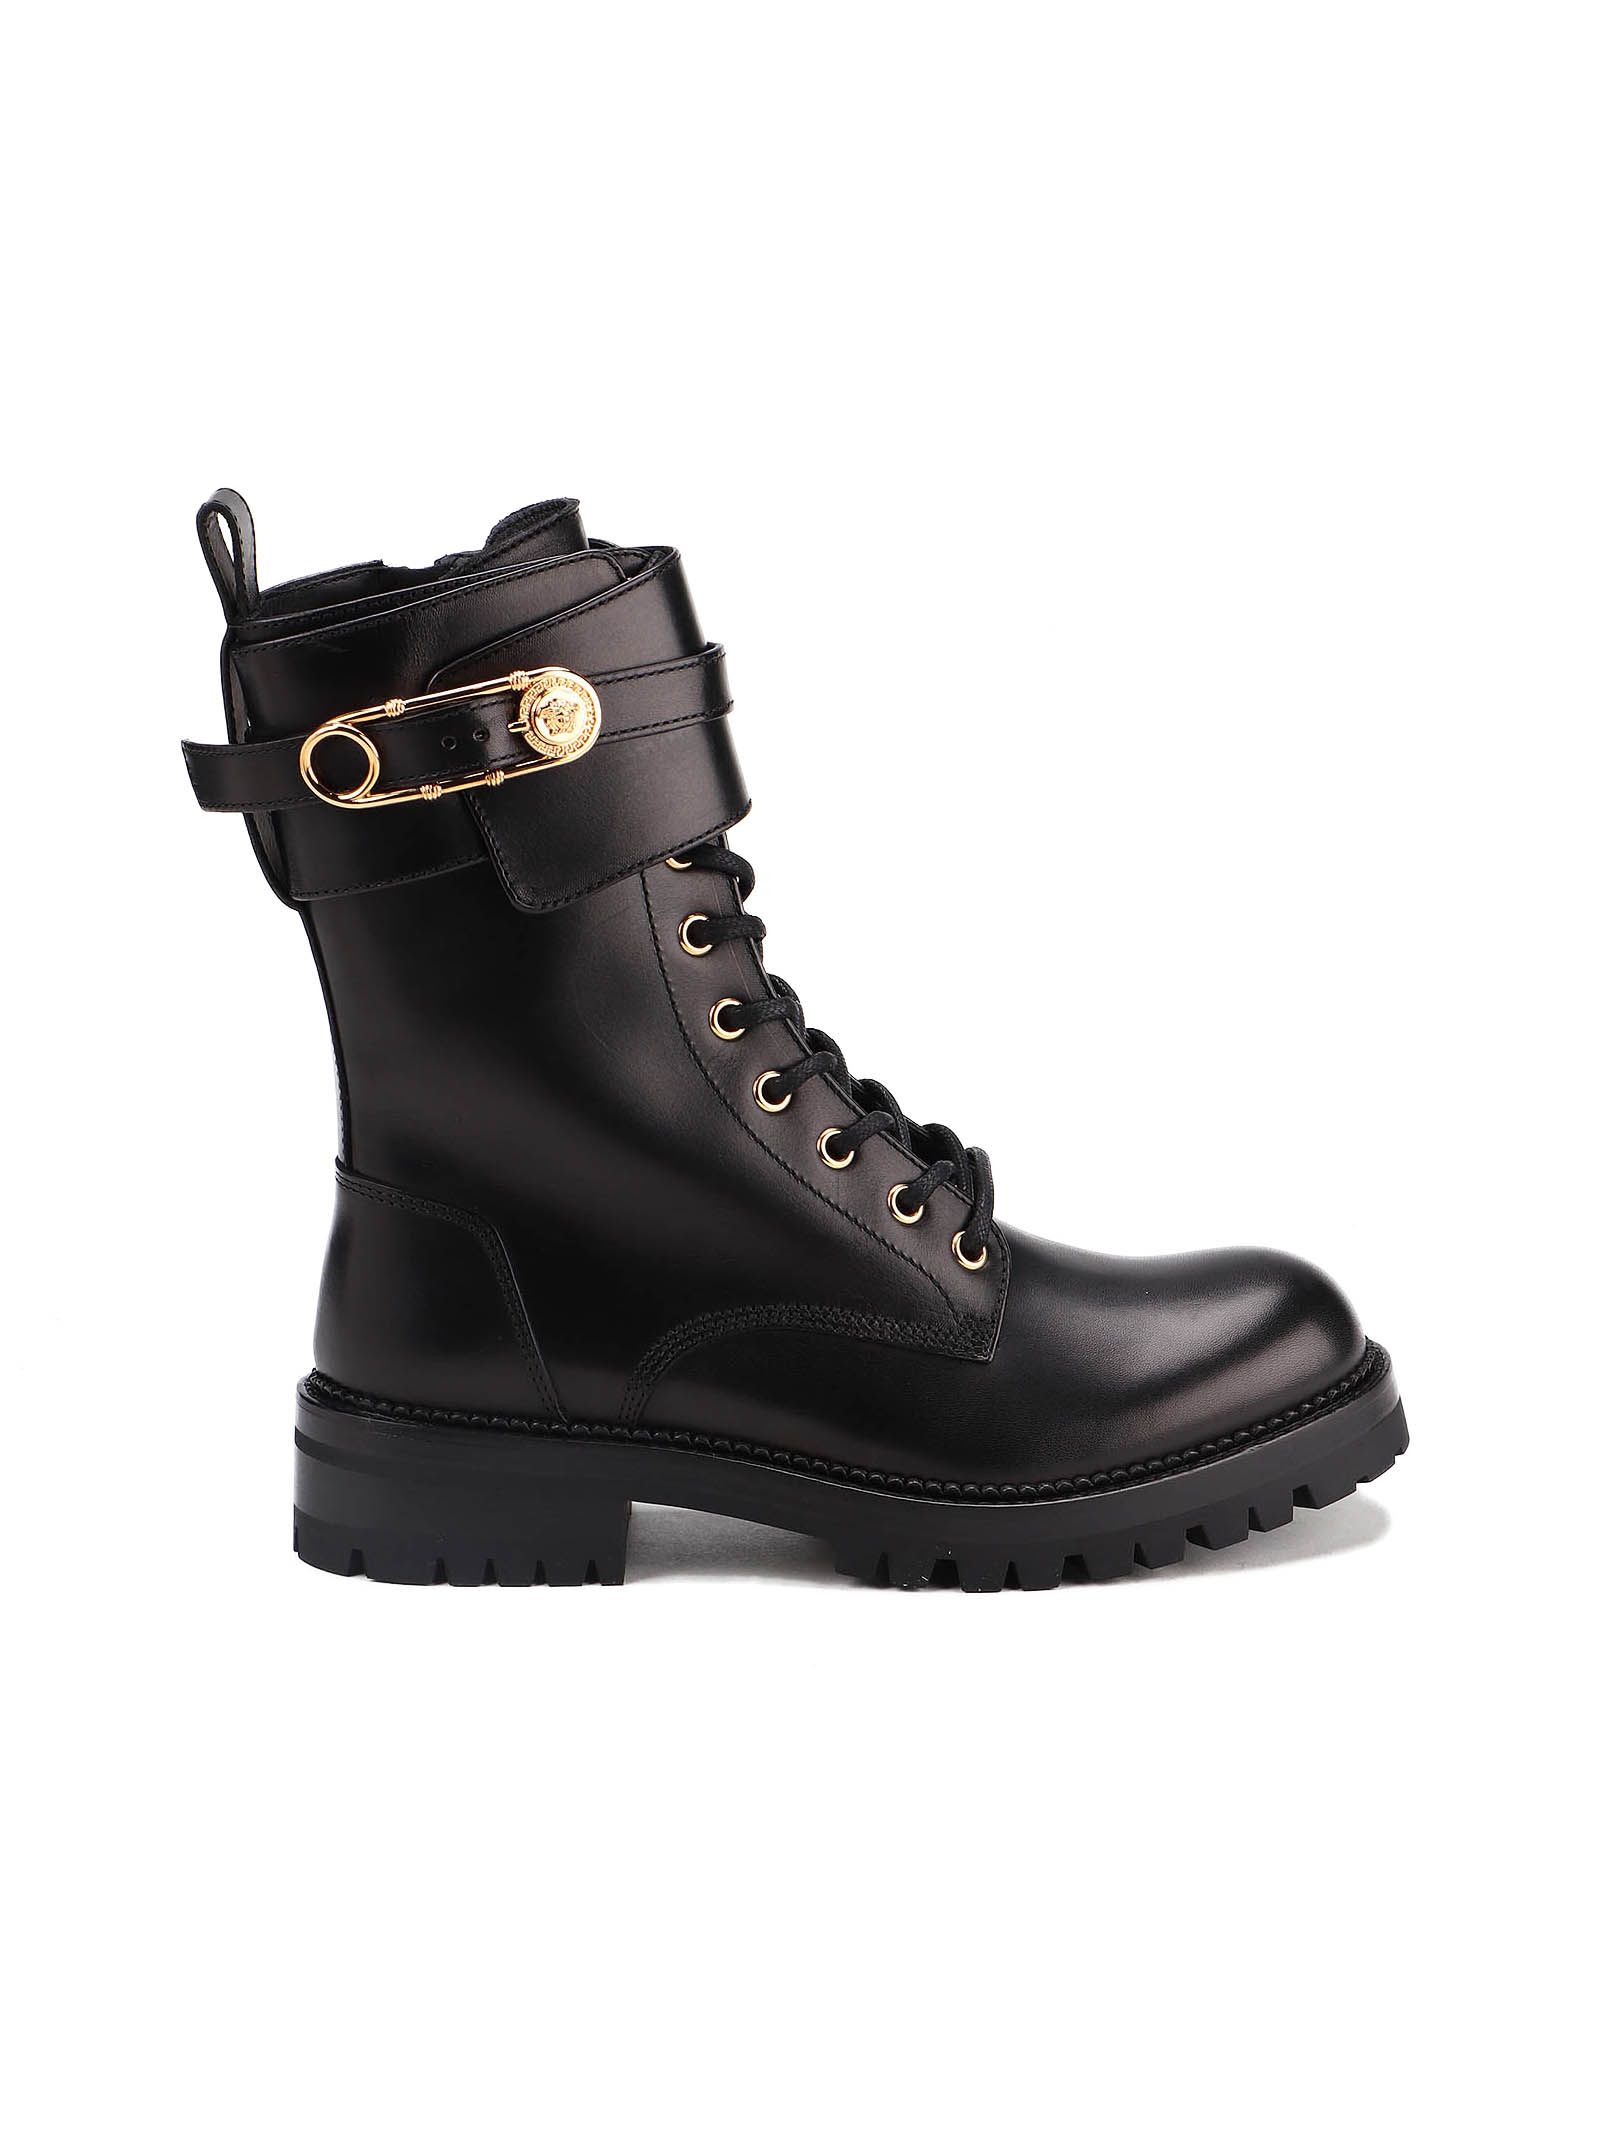 Versace Boots | italist, ALWAYS LIKE A SALE